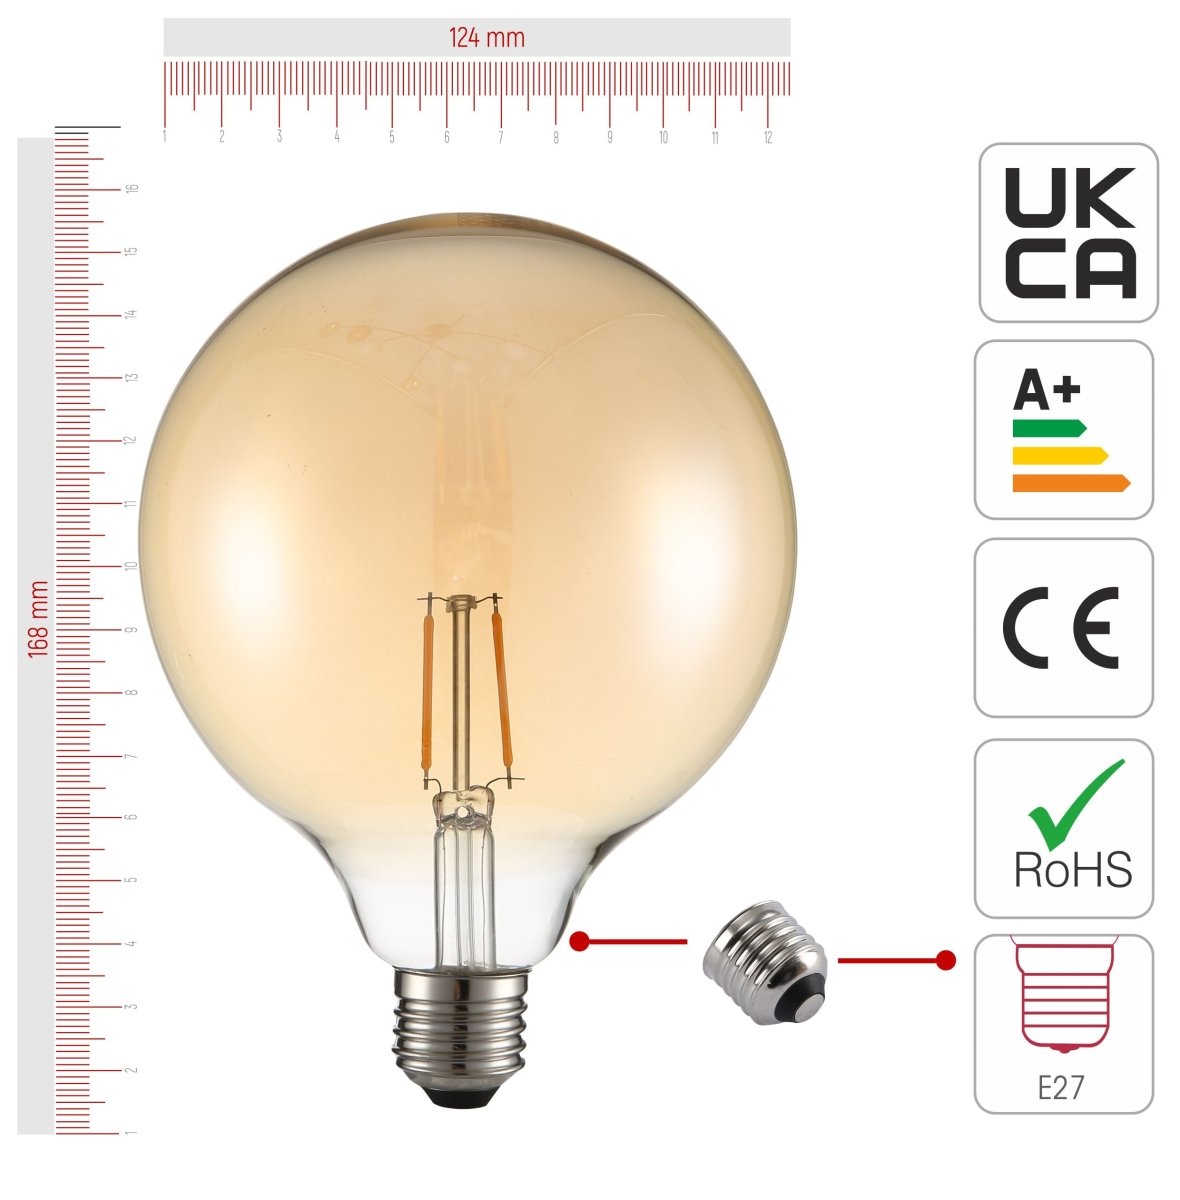 Size and certifications of LED Filament Bulb G125 Globe E27 Edison Screw 2W 220lm Warm White 2400K Amber